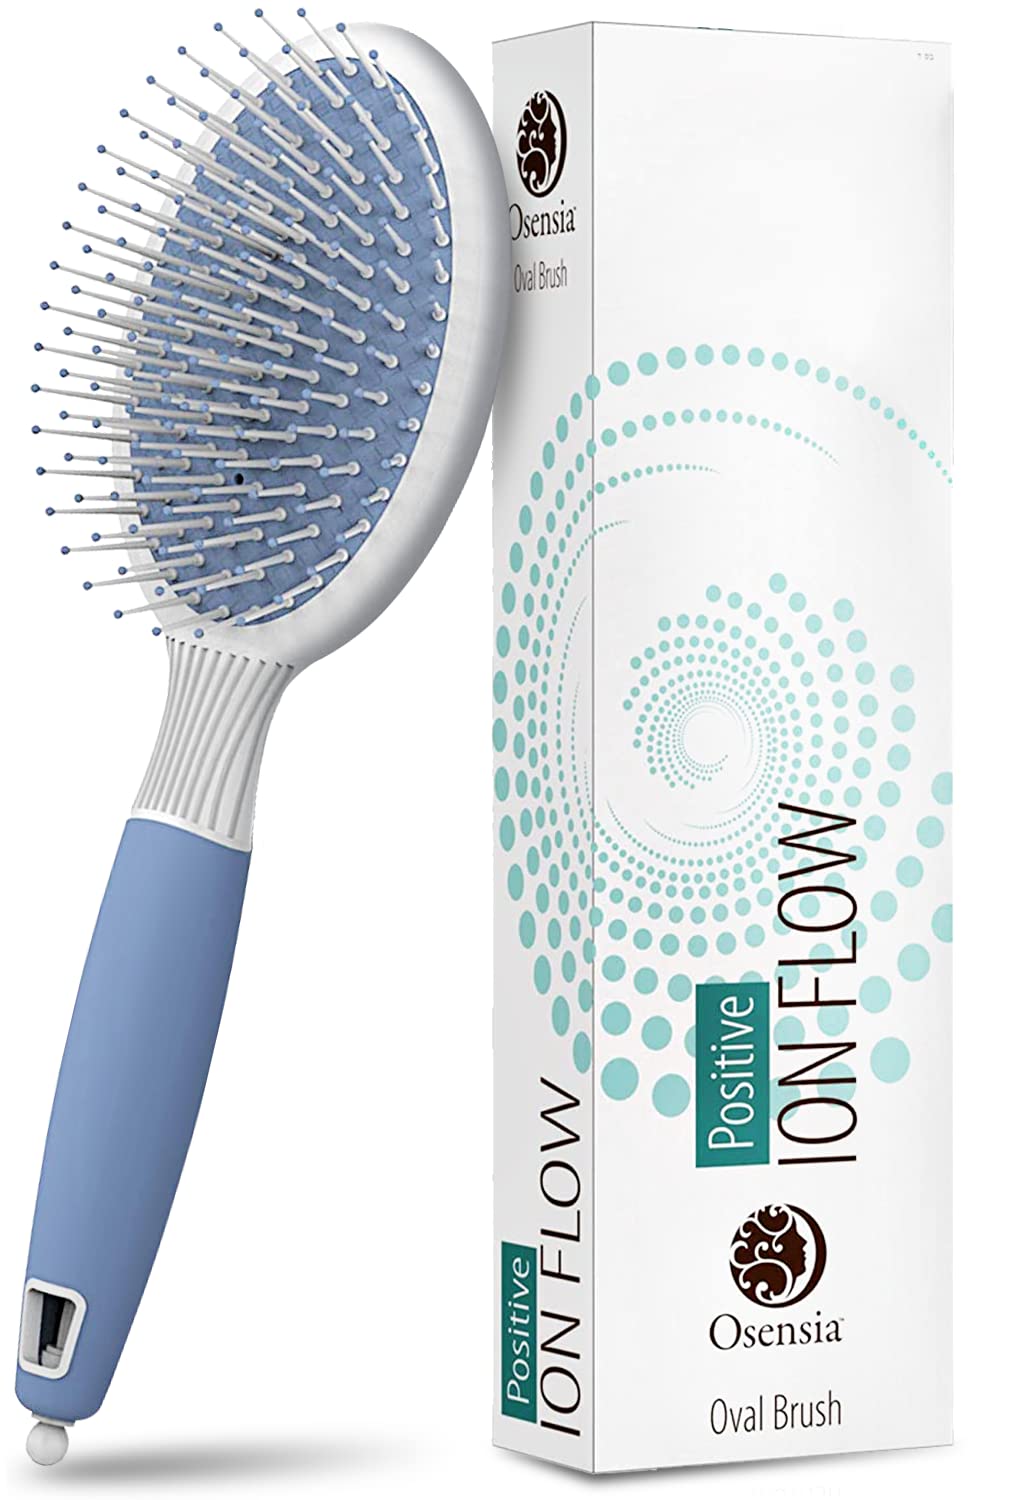 Osensia Oval Curl Detangling Paddle Brush For Curly Hair